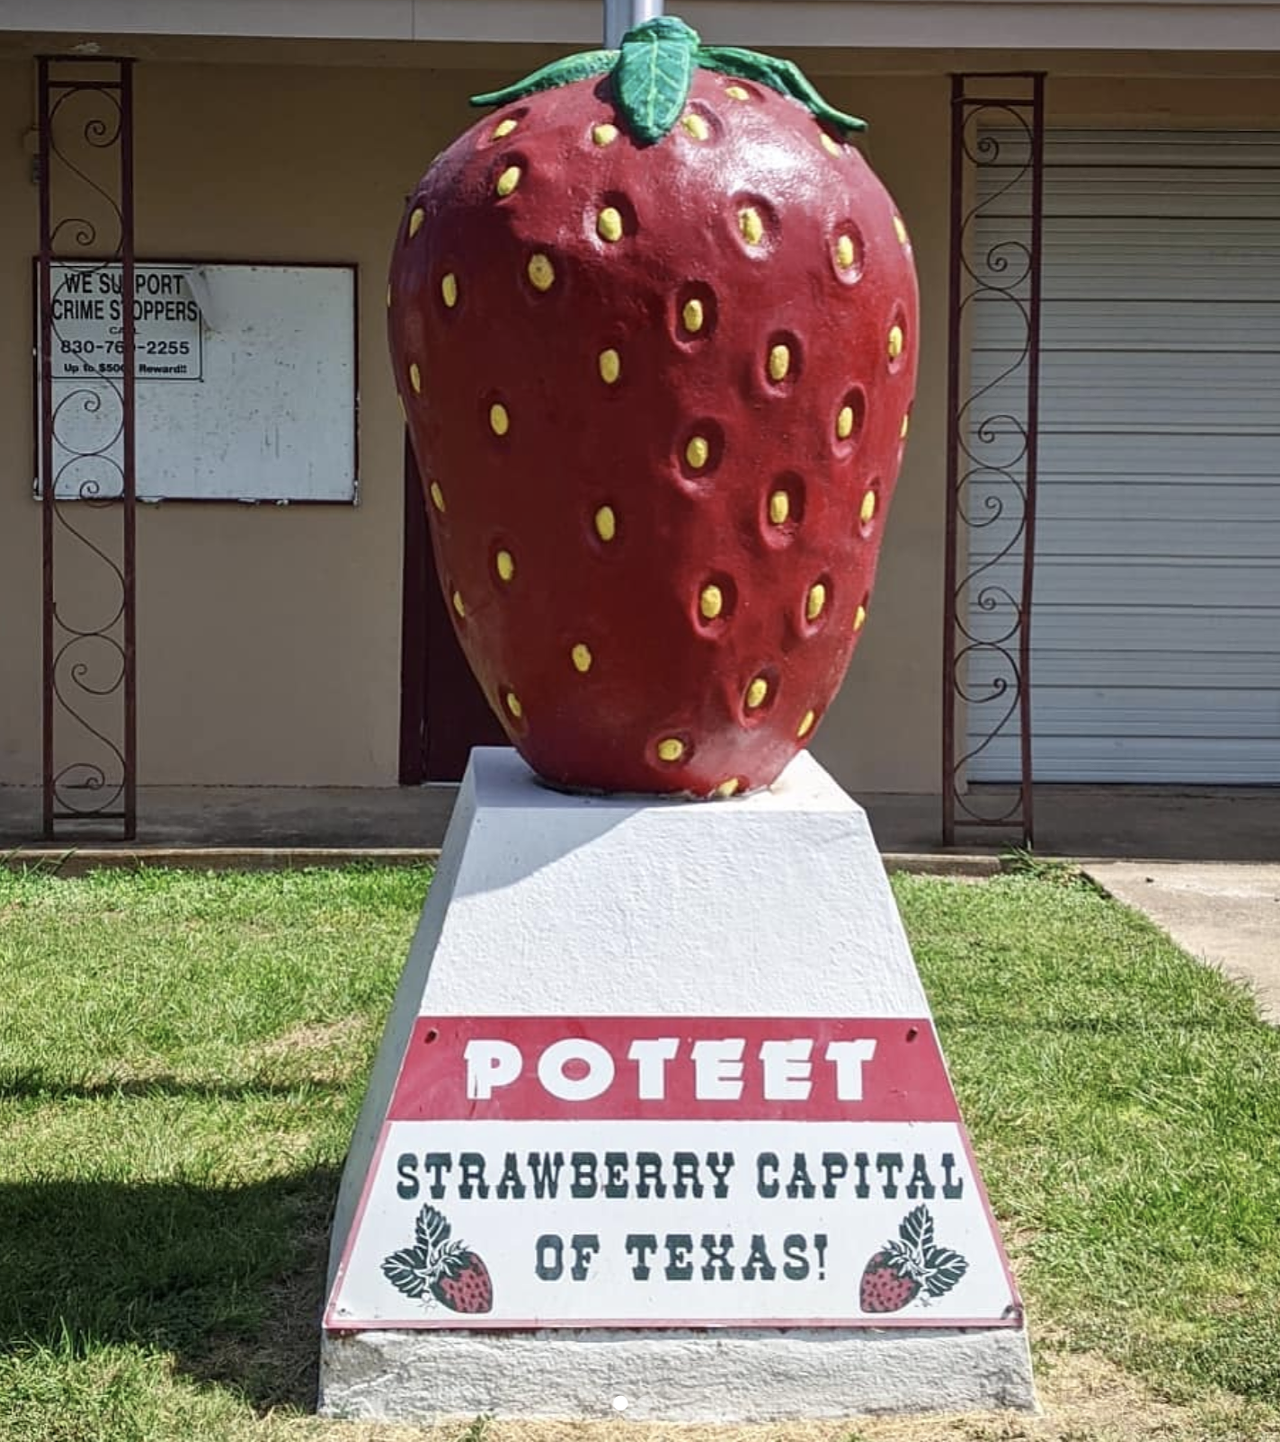 World’s Largest Strawberry, Poteet, TX
530 Avenue H, Poteet, roadsideamerica.com
The strawberries in Poteet are anything but petite, including the 7-foot tall statue of a strawberry located in front of the town’s fire station. Though Poteet’s iconic annual Strawberry festival was canceled this year due to the pandemic, the burg pays homage to its trademark crop year round with statues and artwork. 
Photo via Instagram /  laurenturek